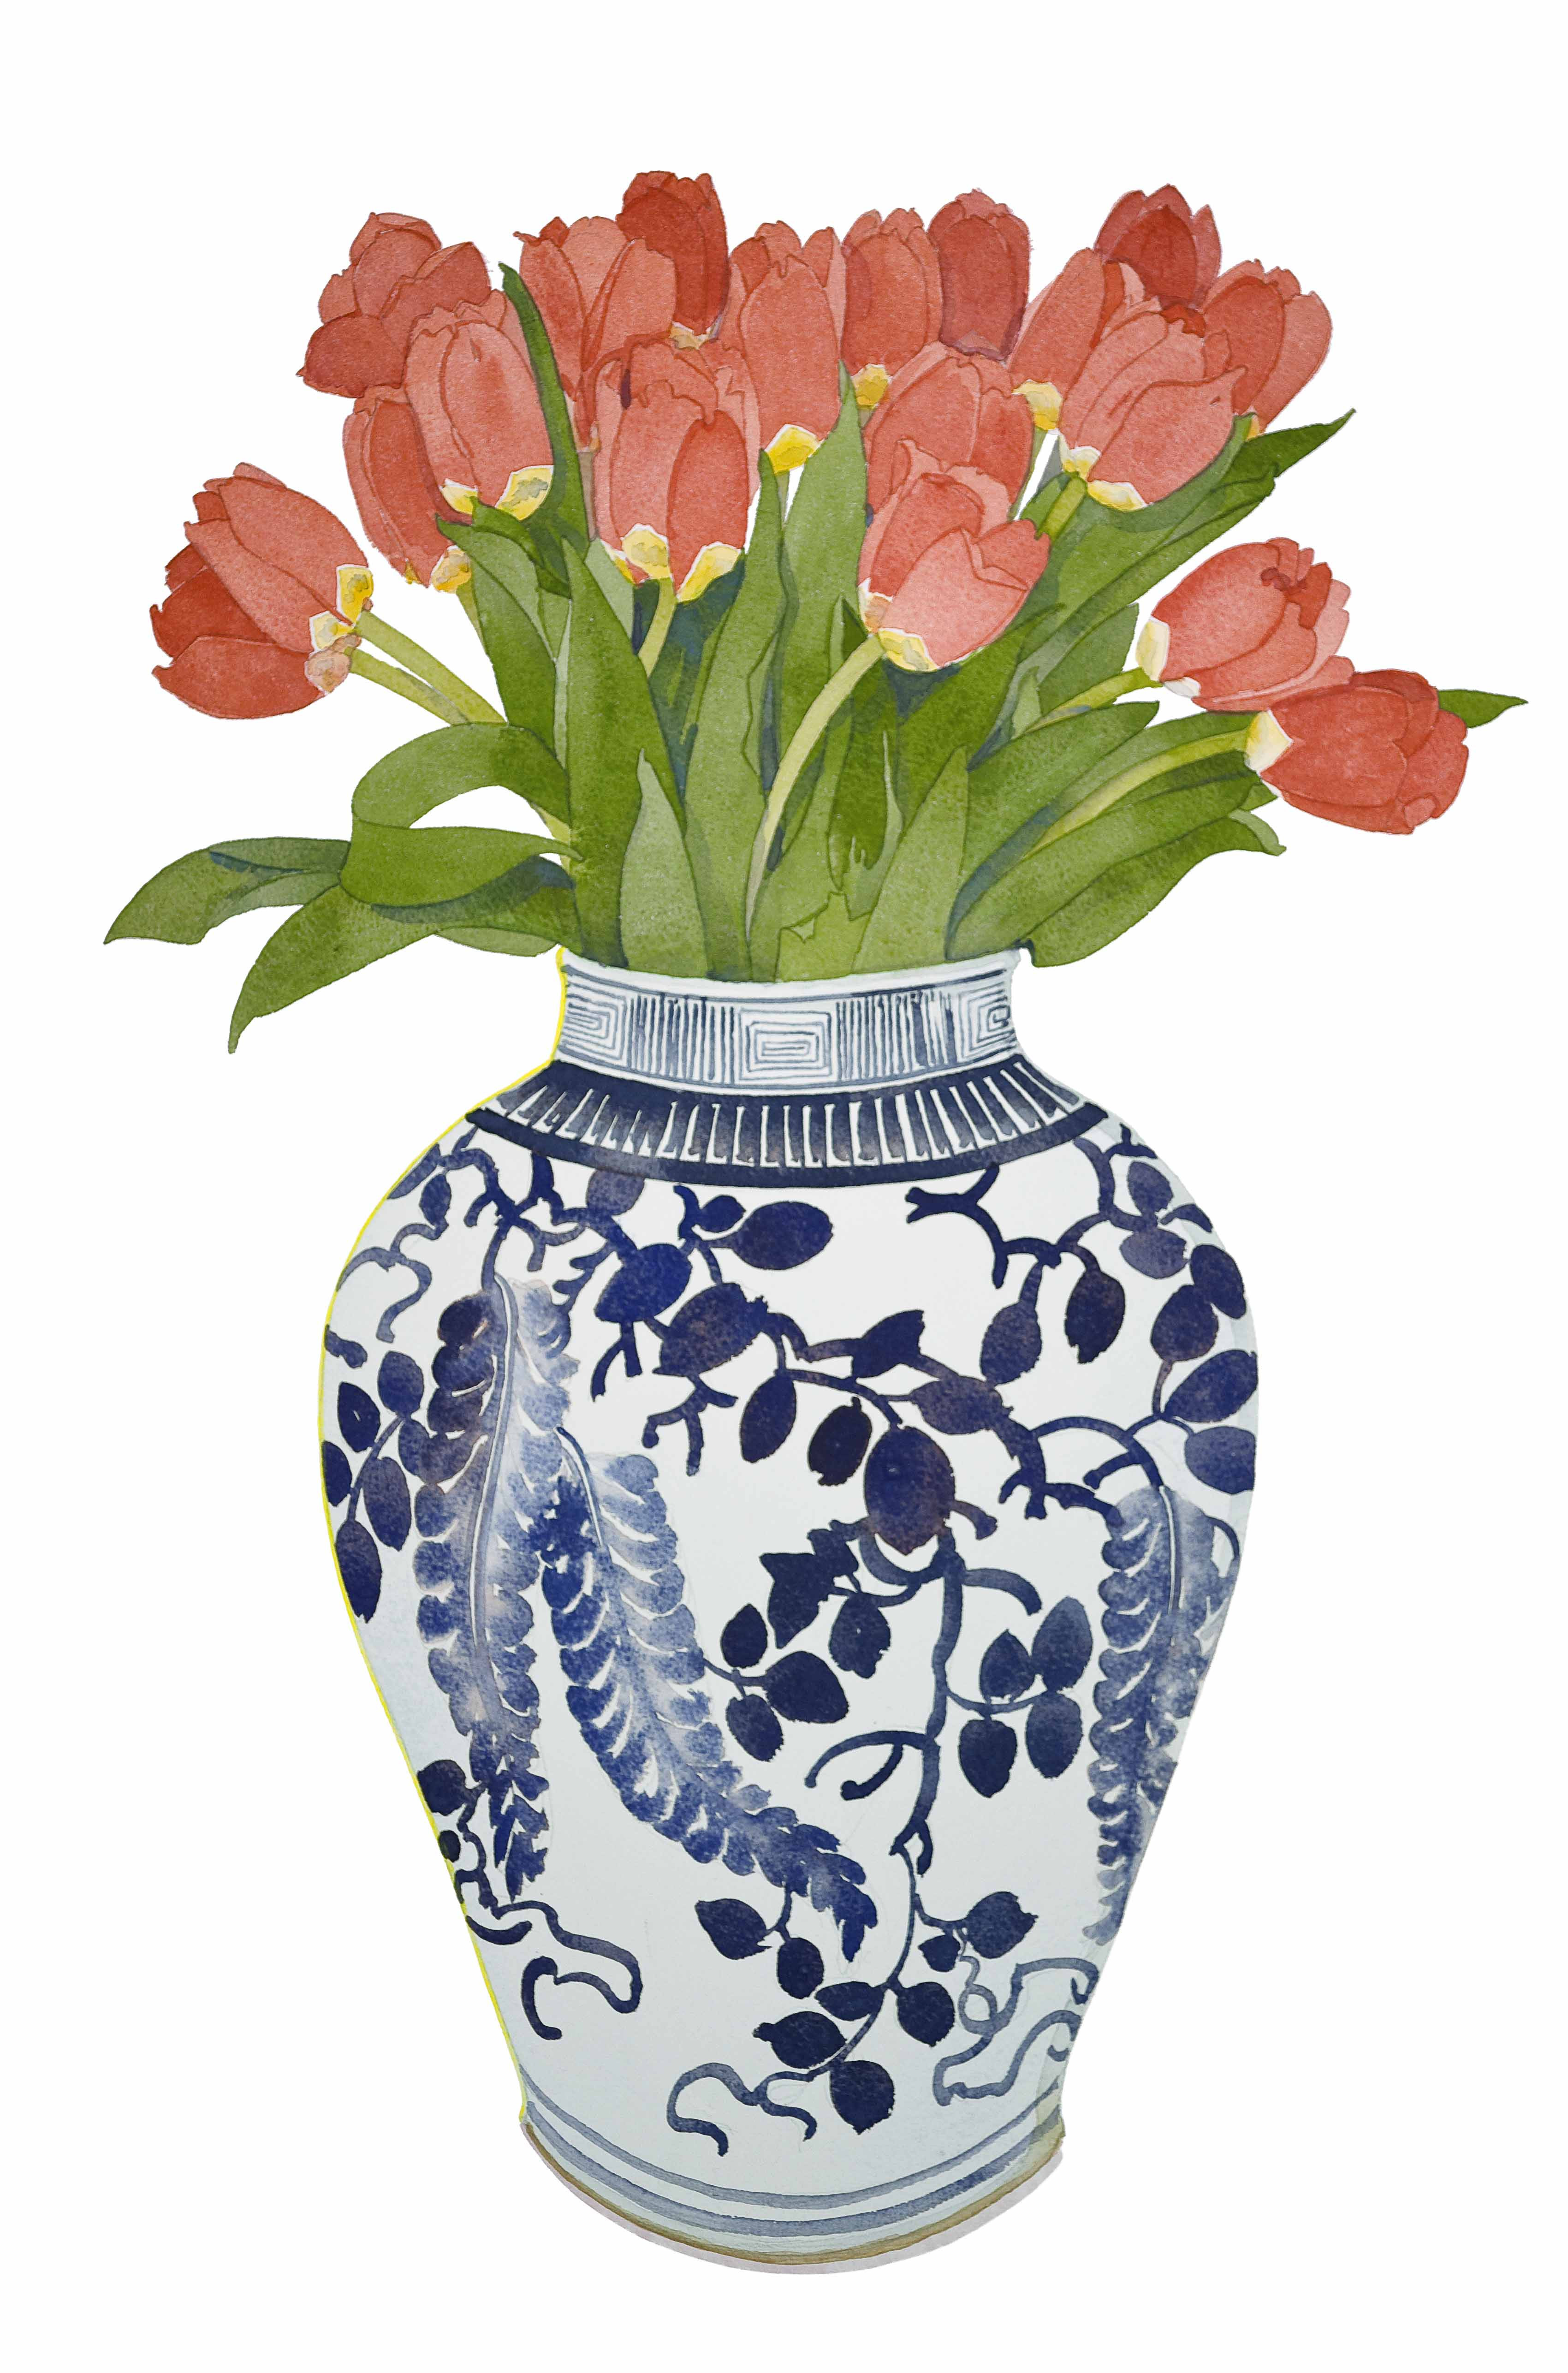 Tulips in a Chinese Vase